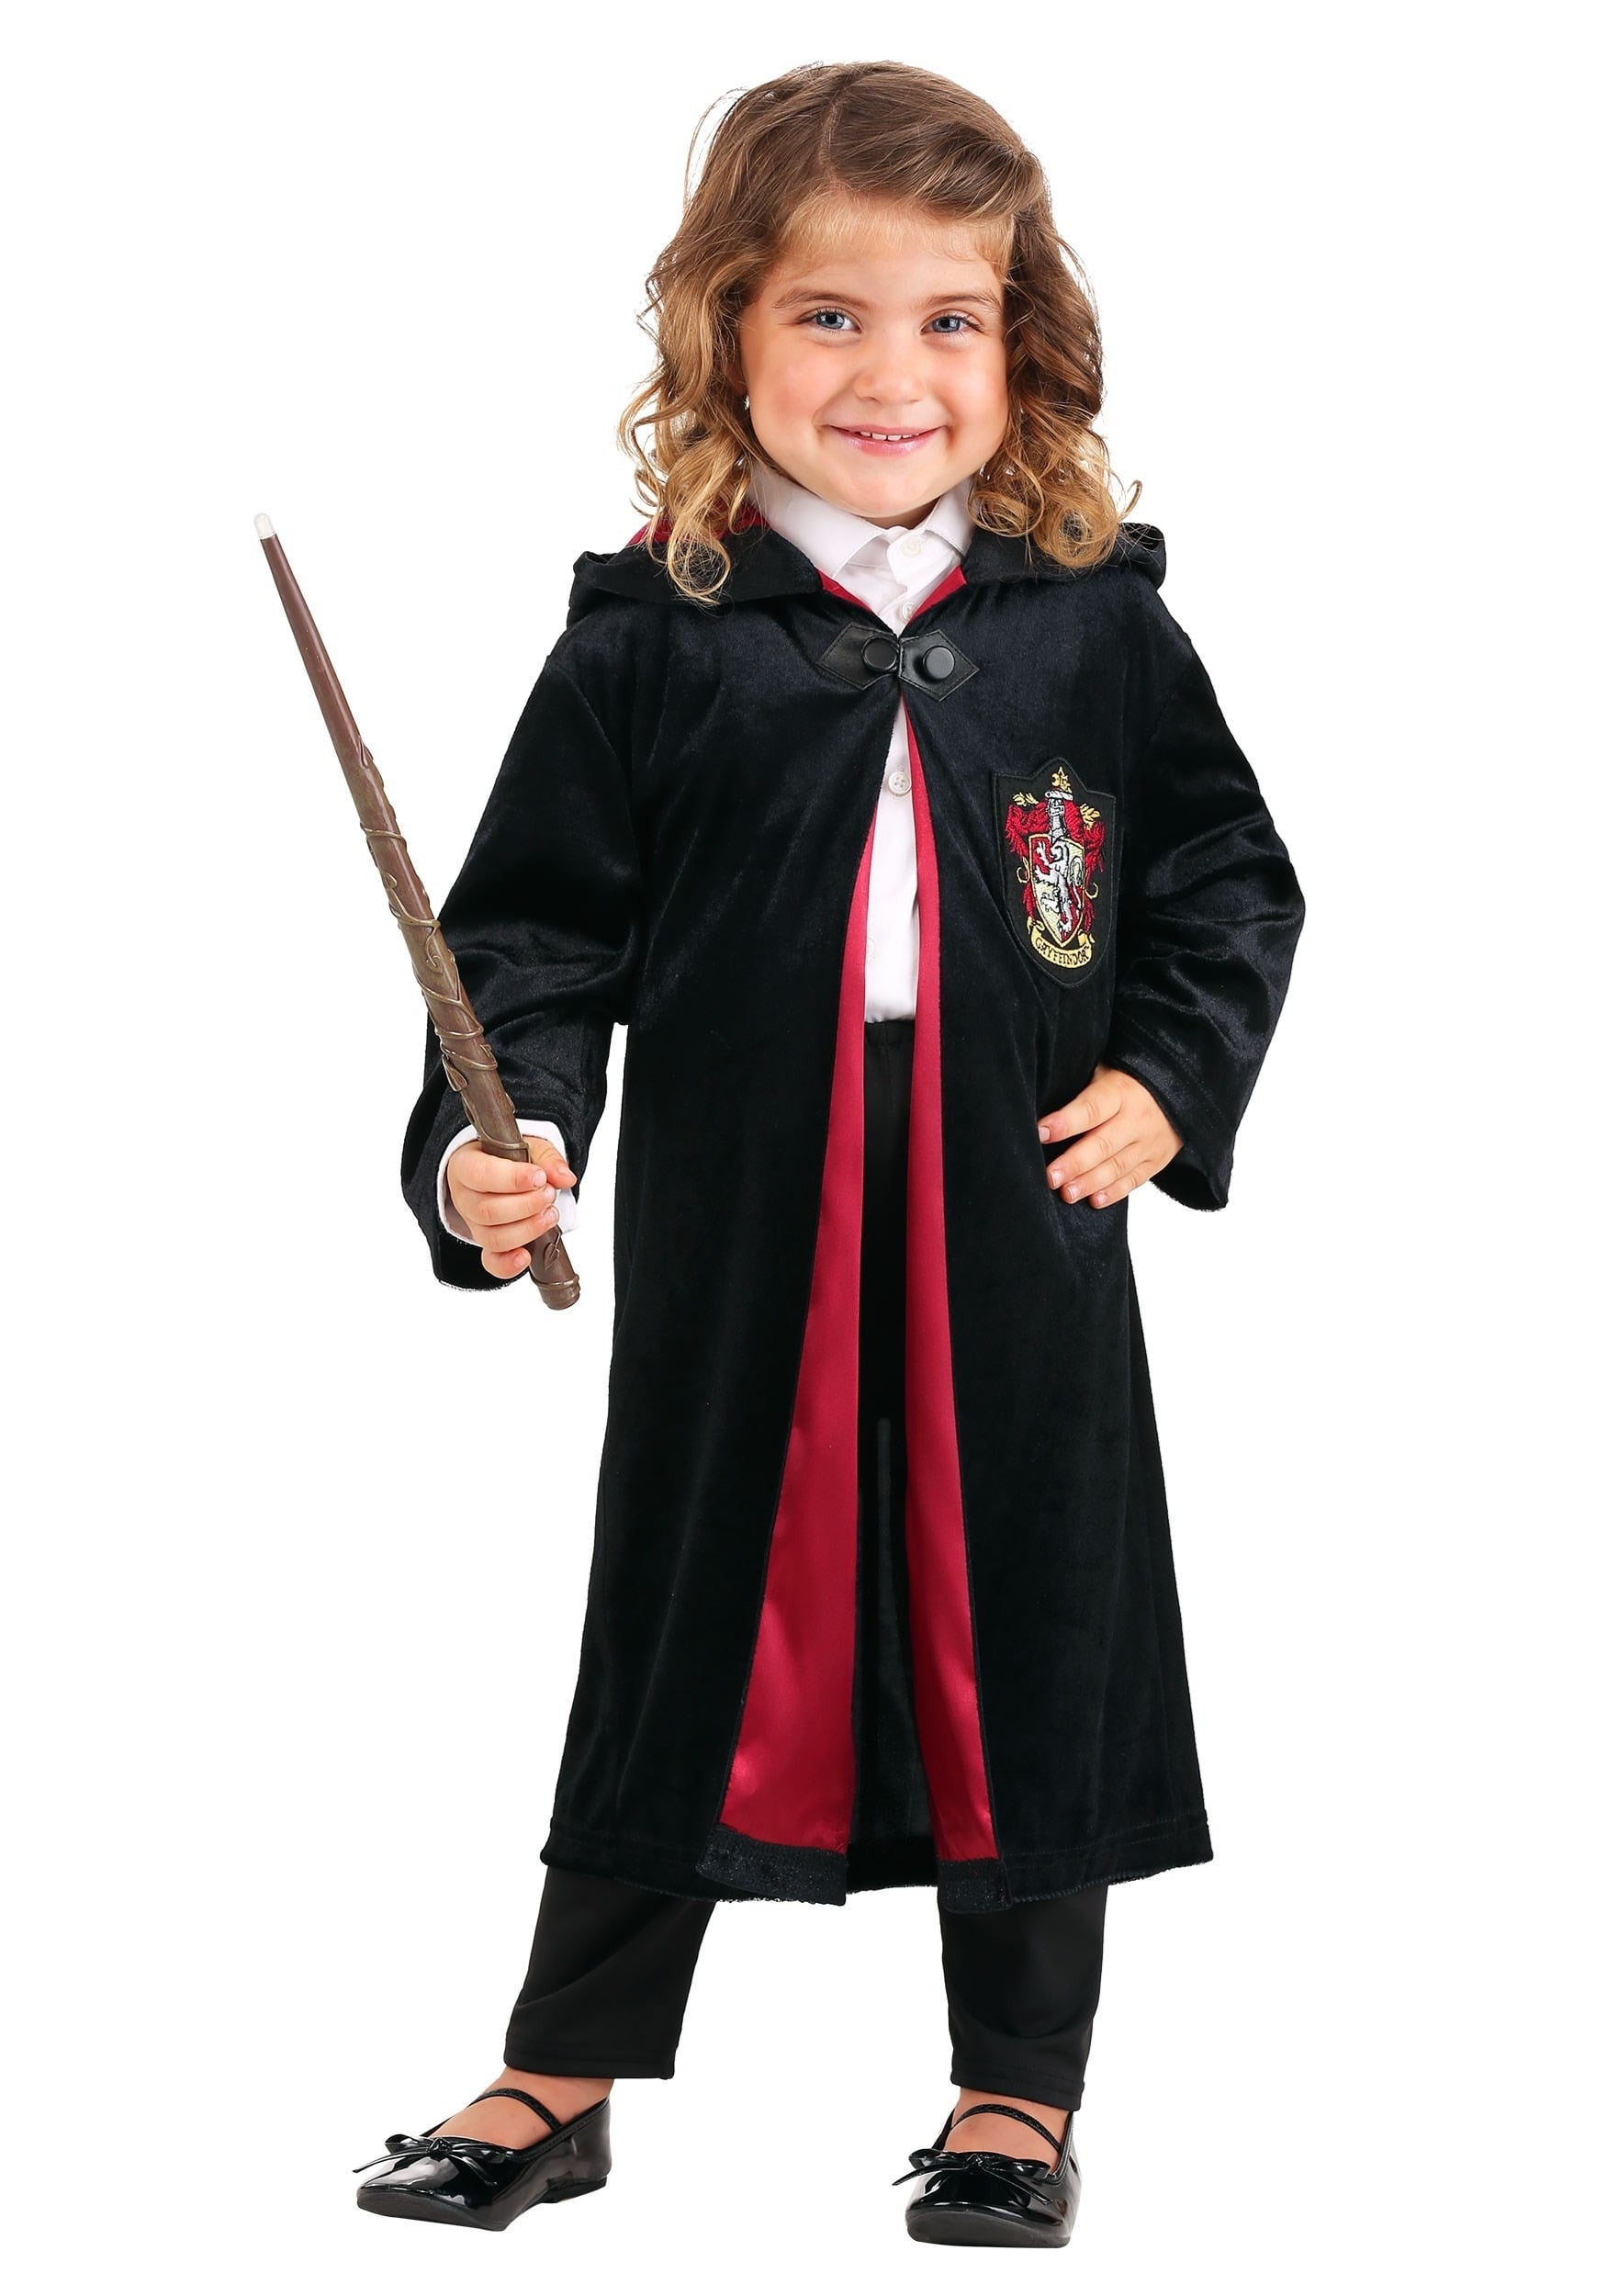 HARRY POTTER GRYFFINDOR COSTUME CAPE DRESS SIZE 2T 3T 4T 5T NEW! 